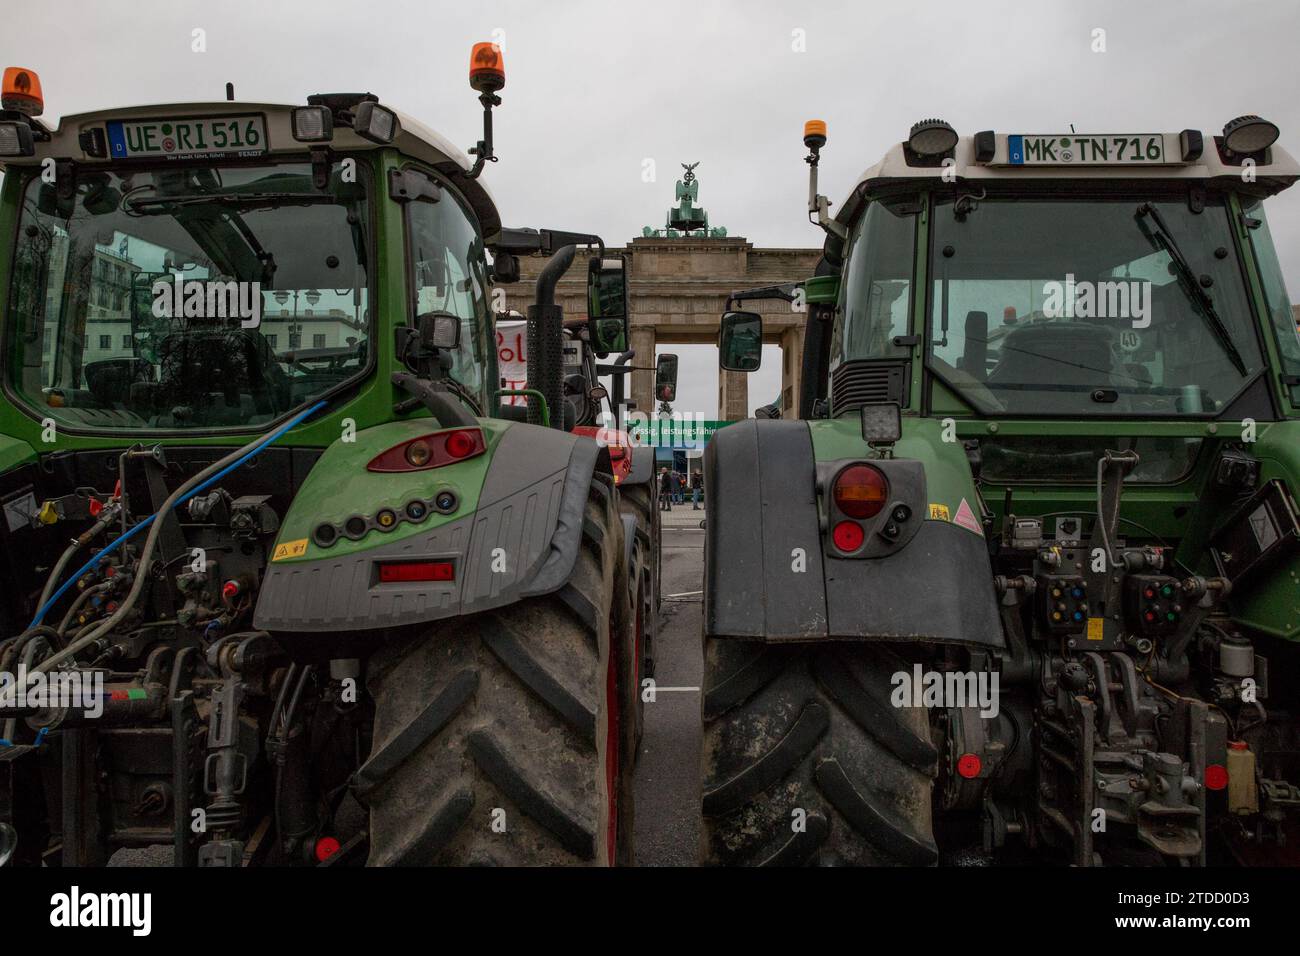 In Berlin on December 18, 2023, thousands of German farmers staged a massive protest against the government's proposed austerity measures, which include slashing diesel subsidies and eliminating vehicle tax exemptions for farmers. Organized by the German Farmers' Association (DBV), the demonstration was anticipated to attract around 3,000 participants nationwide. The DBV has vehemently opposed these cuts, warning that they would deal a severe blow to the agricultural sector, potentially leading to job losses and escalating food prices. Furthermore, the association argues that such measures wou Stock Photo